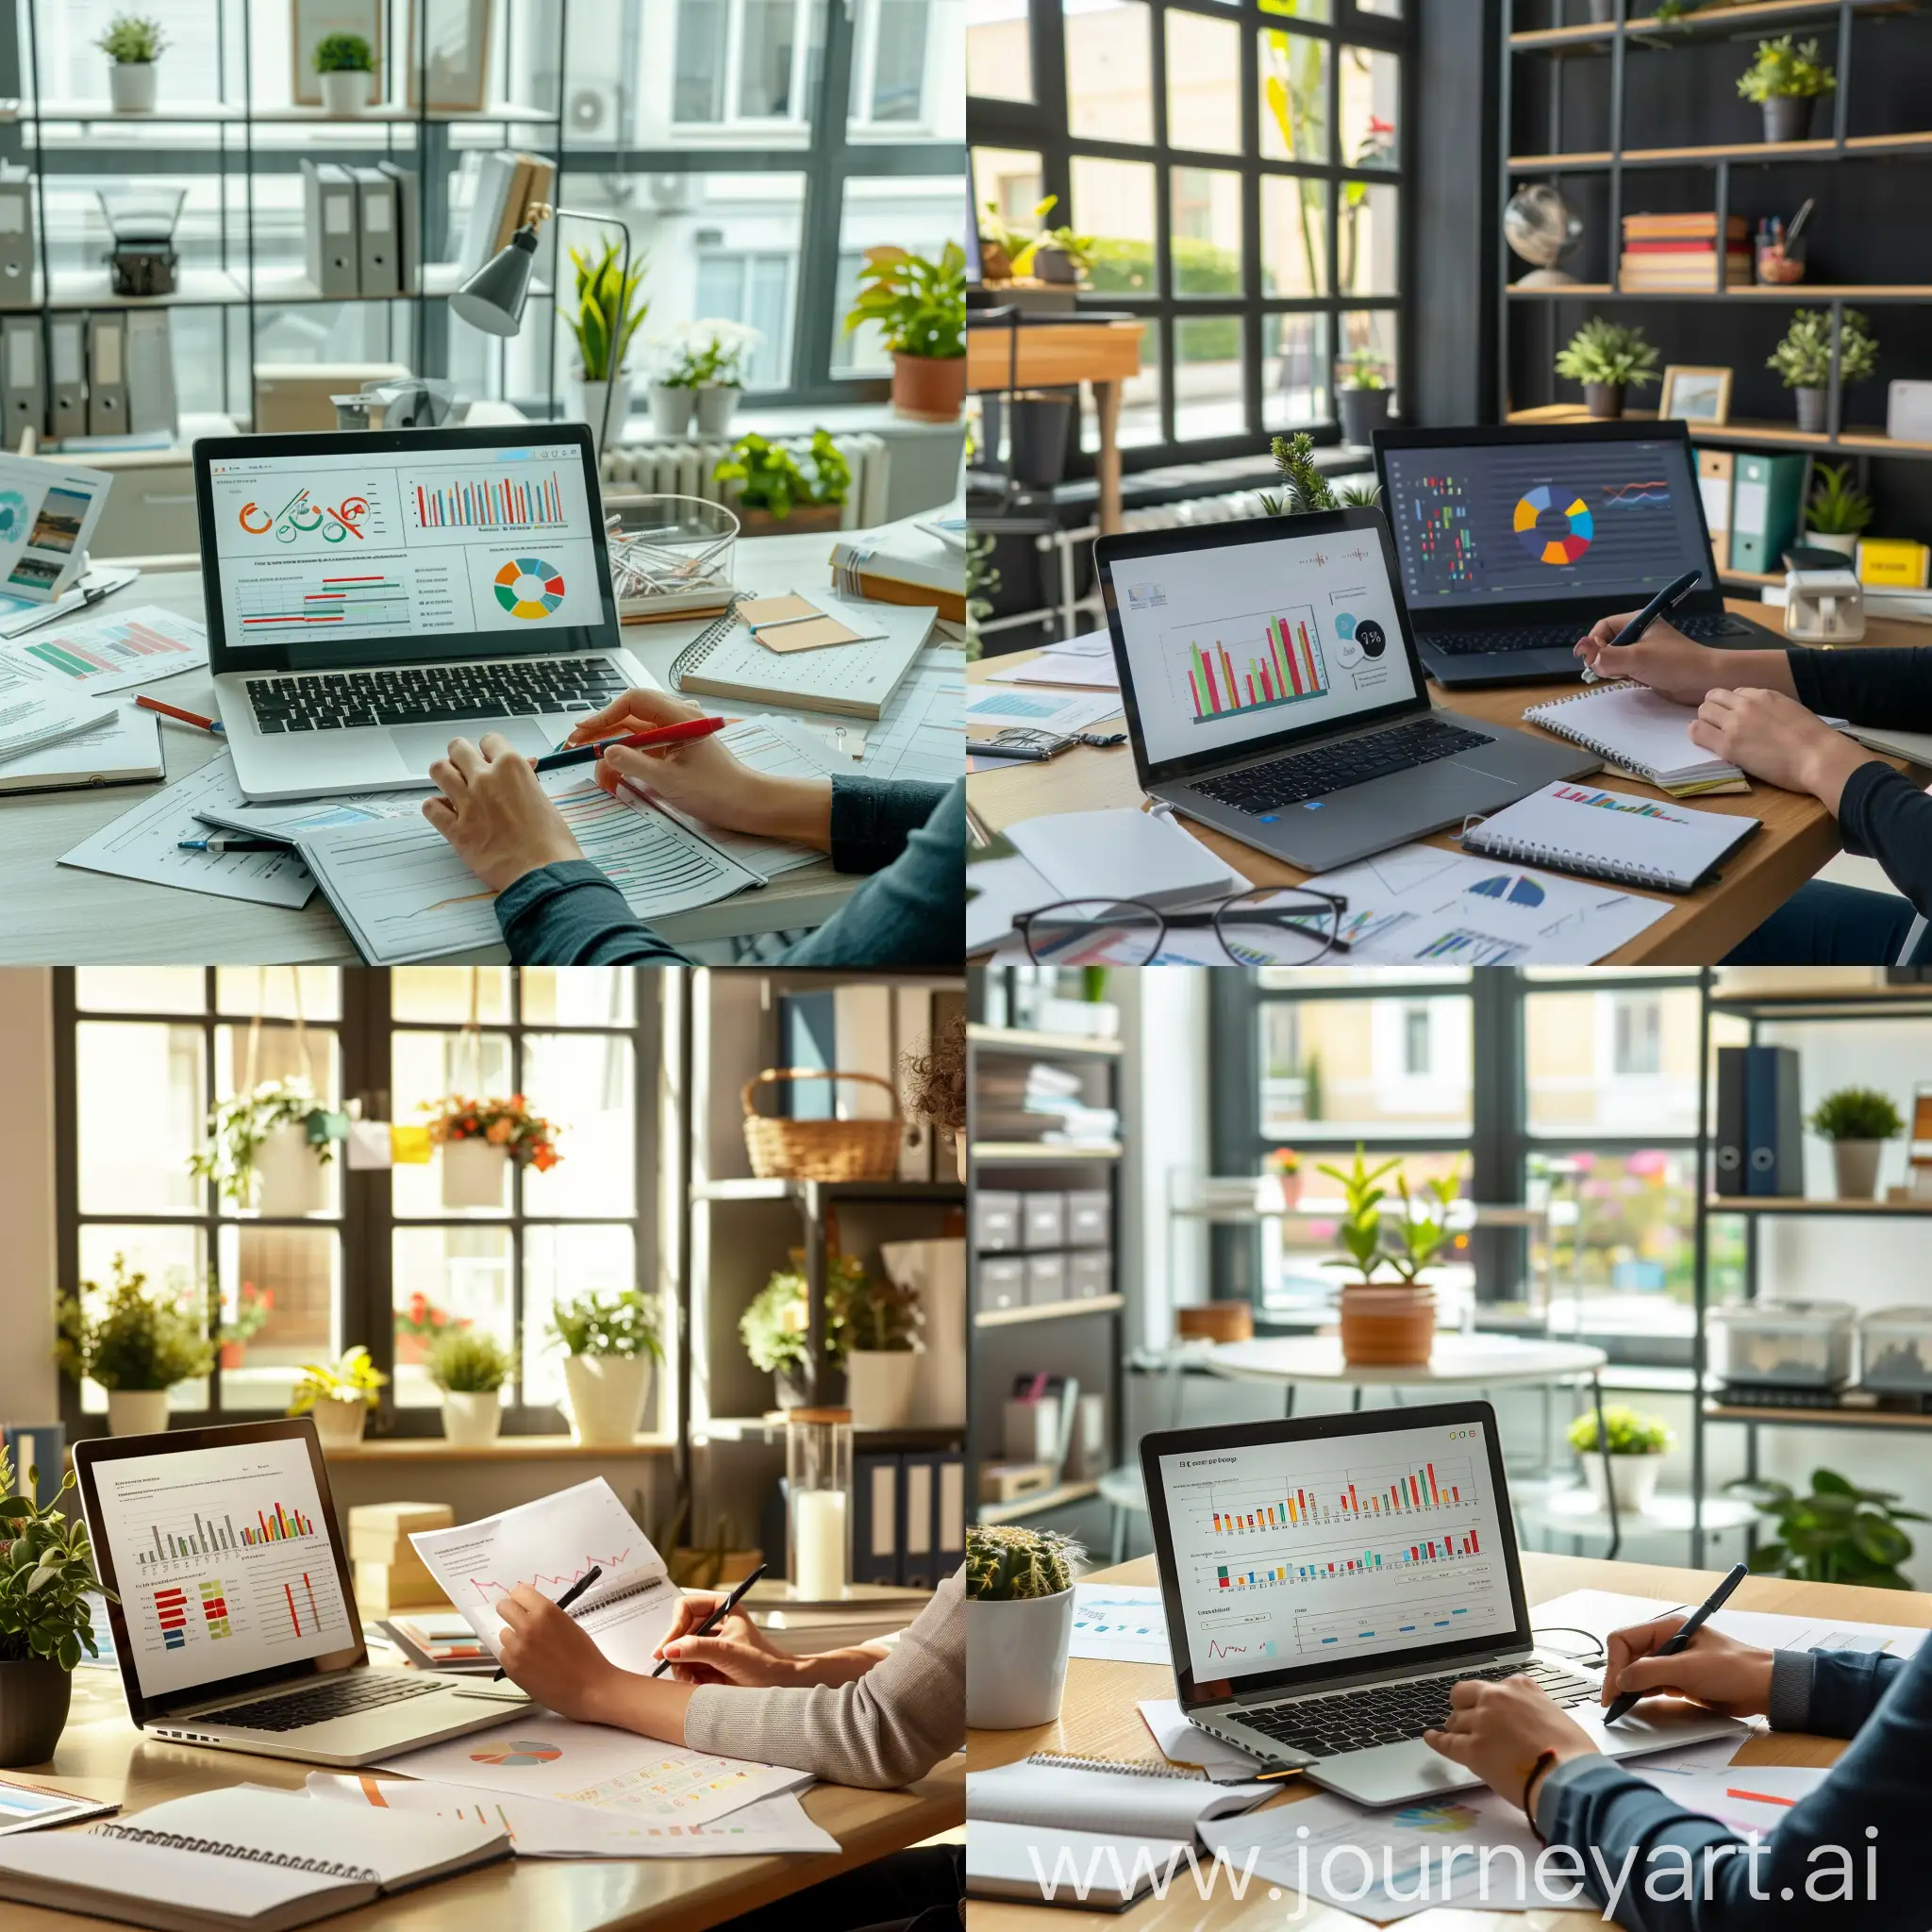 /imagine a person sitting at a desk in a modern office, with a laptop open and scattered papers around. The laptop screen displays a detailed keyword research graph with colorful bars and lines. The person is writing notes in a notebook, with a focused expression on their face. The office is well-lit with large windows, potted plants, and organized shelves. The person is wearing smart casual attire, giving a professional appearance.